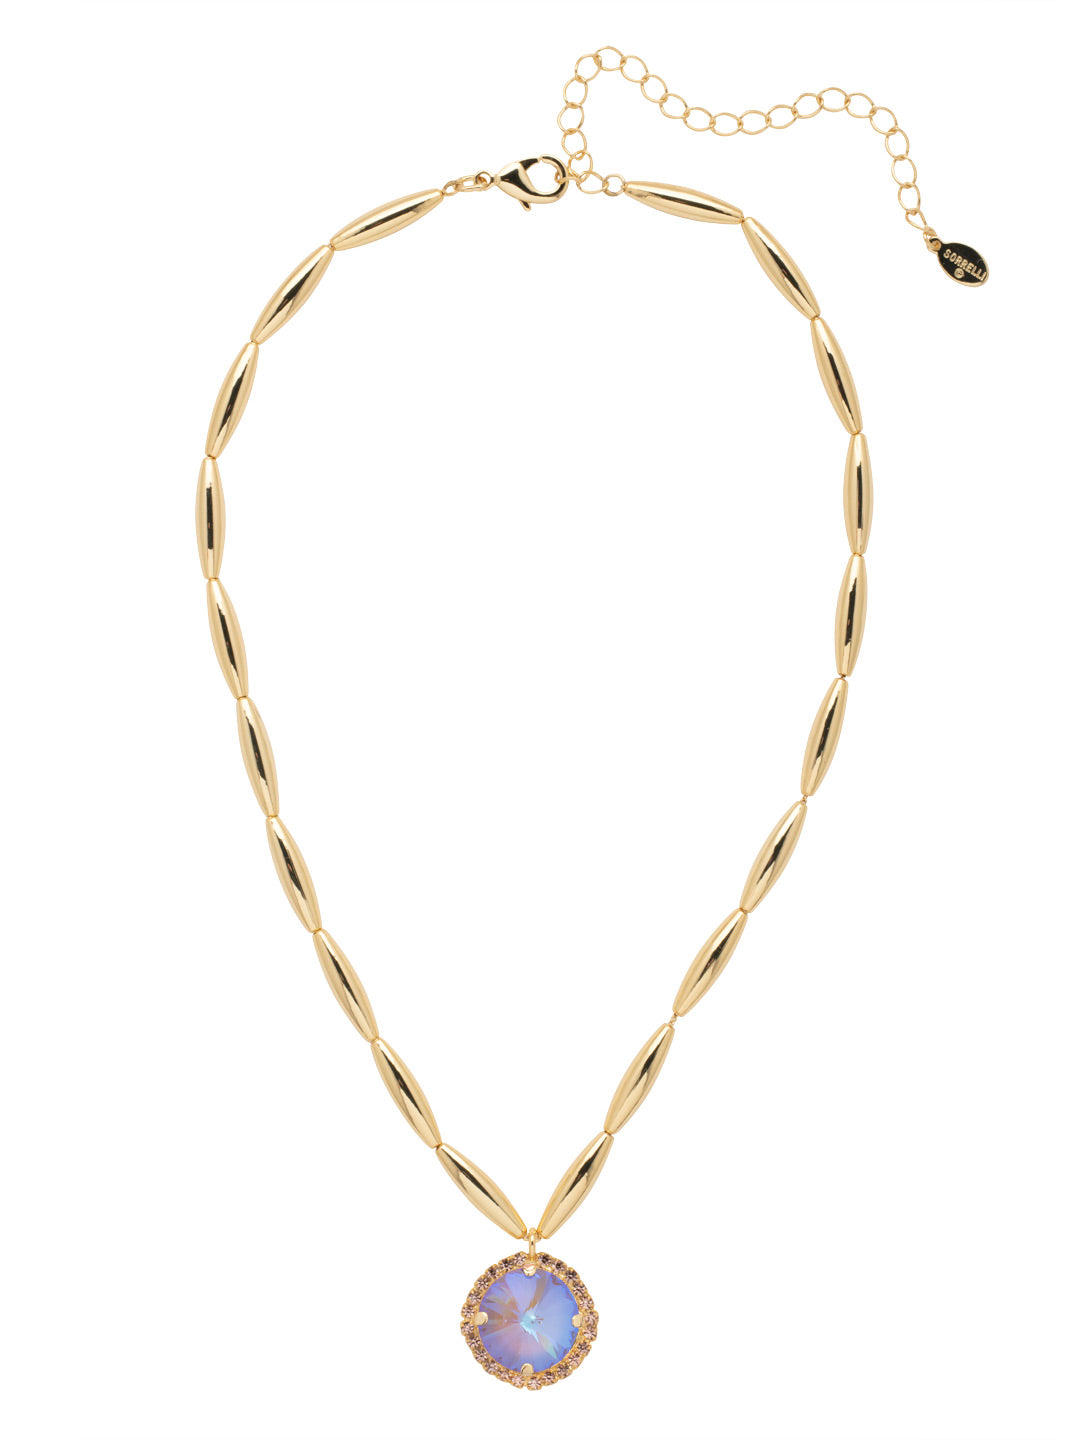 Giselle Pendant Necklace - NFC82BGRSU - <p>The Giselle Pendant Necklace features a bold round halo cut crystal on an adjustable tubular style chain, secured in the back with a lobster claw clasp. From Sorrelli's Raw Sugar collection in our Bright Gold-tone finish.</p>